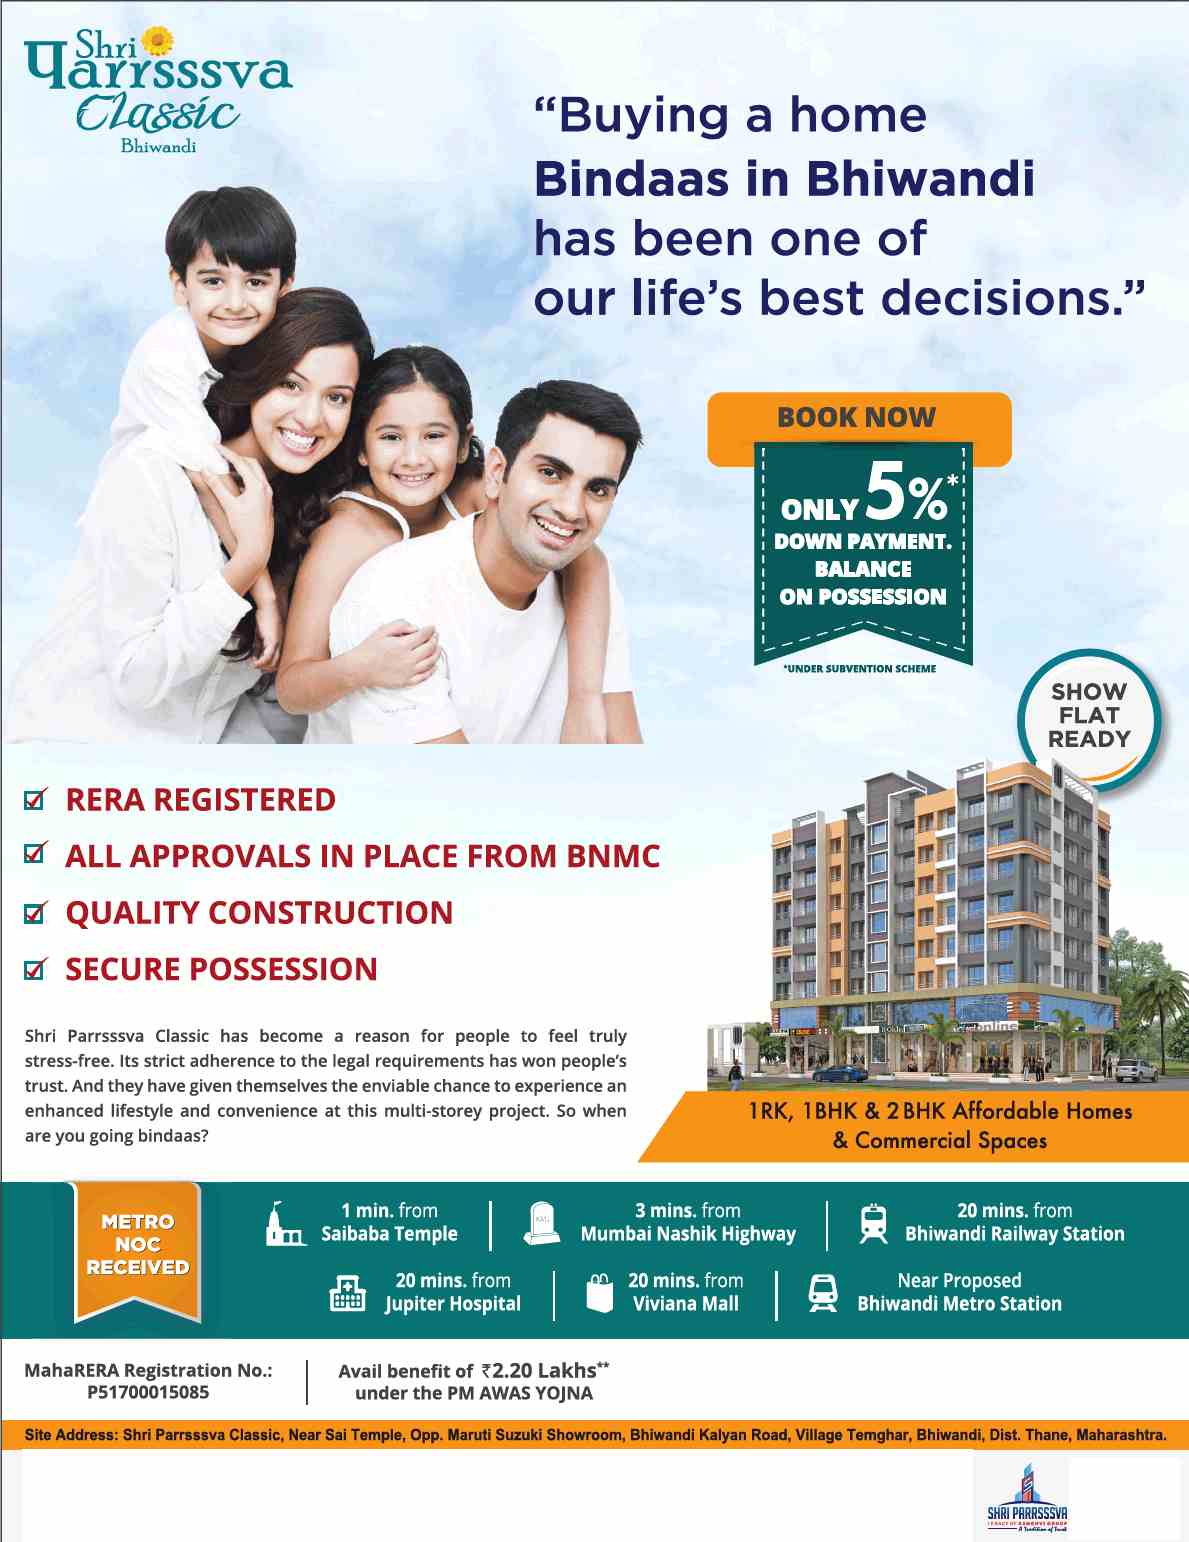 Pay only 5% down payment & balance on possession at Shri Parrsssva Classic in Mumbai